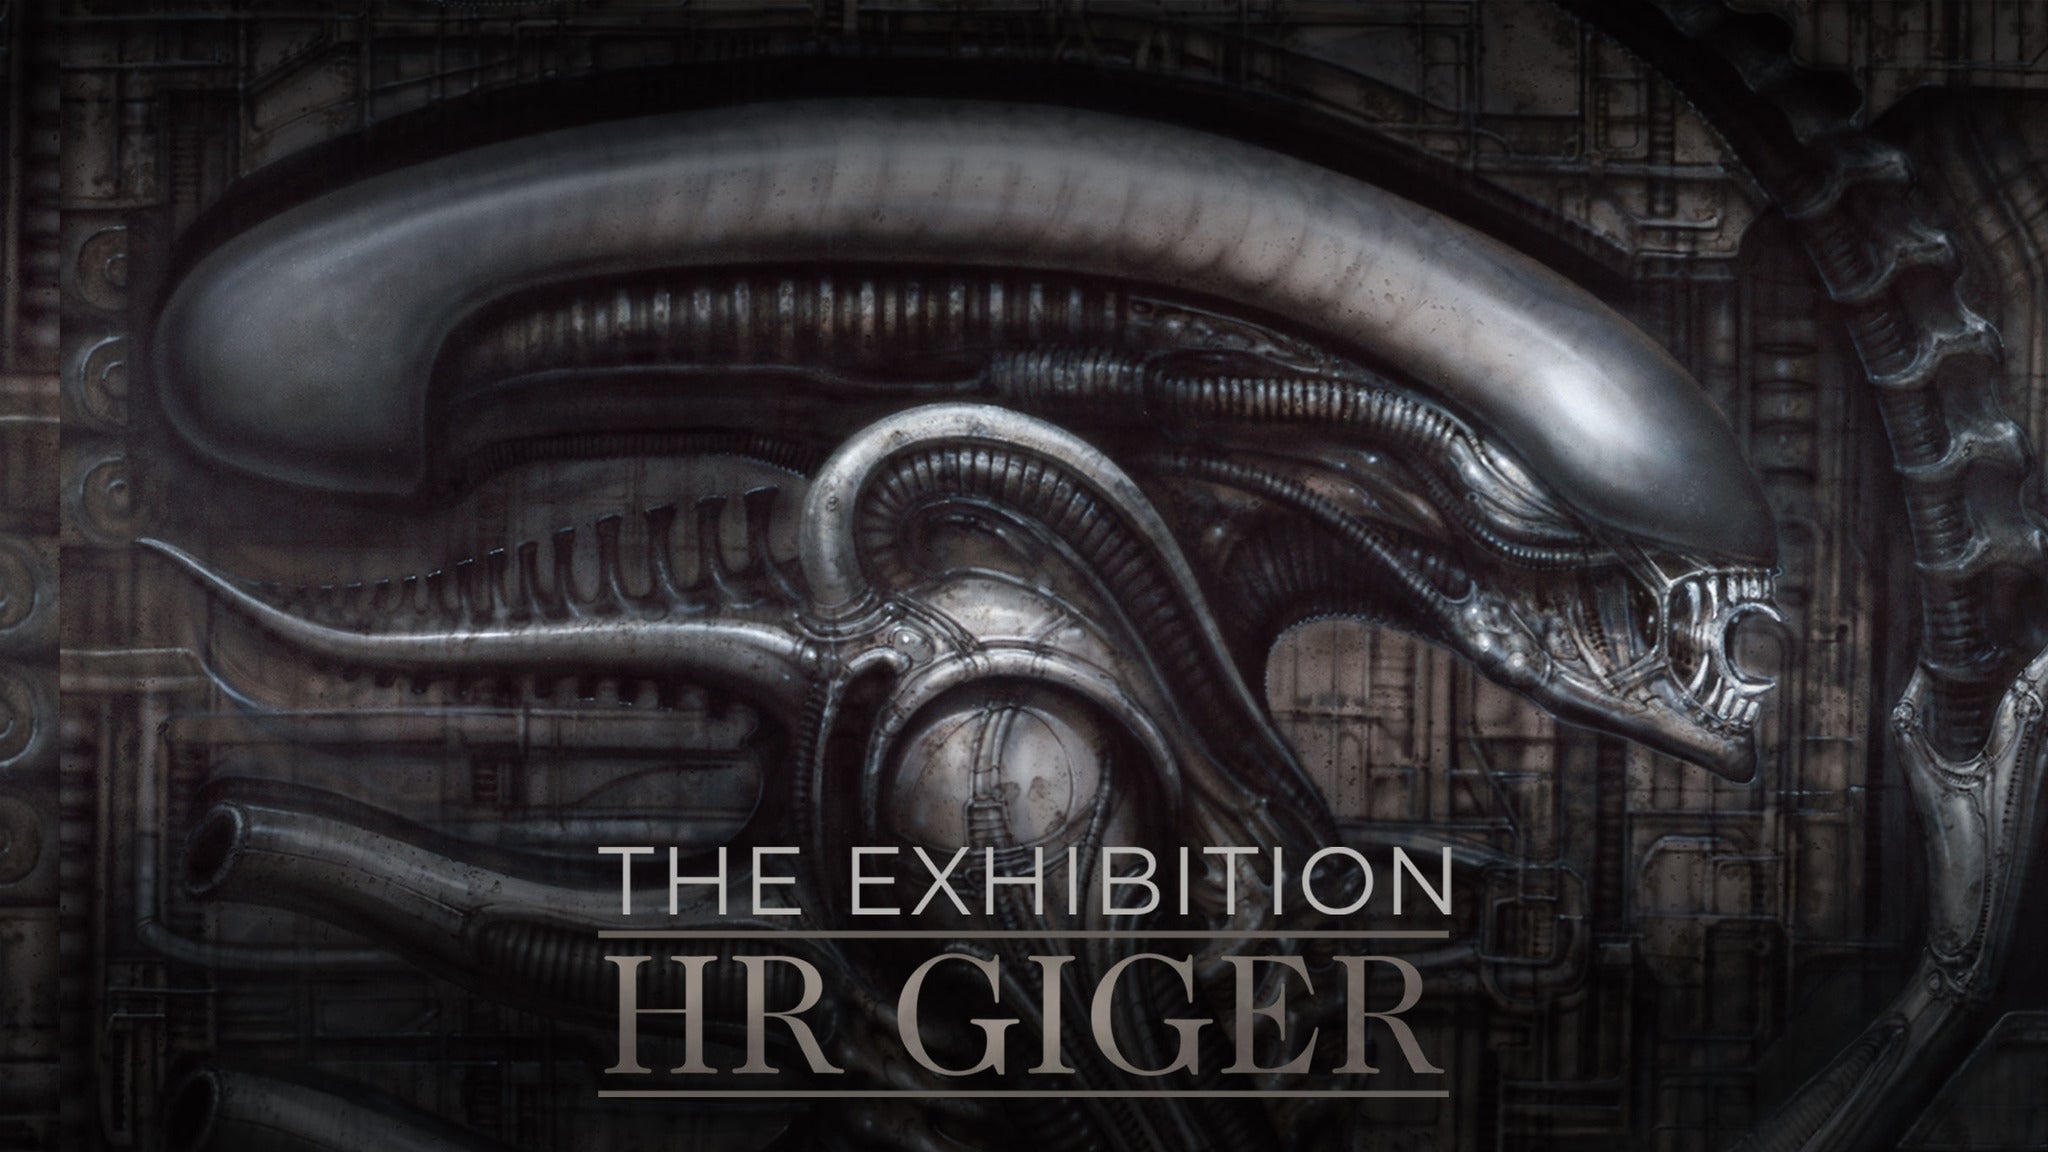 H.R Giger Exhibition “Alone with the Night” - Los Angeles, CA 90028